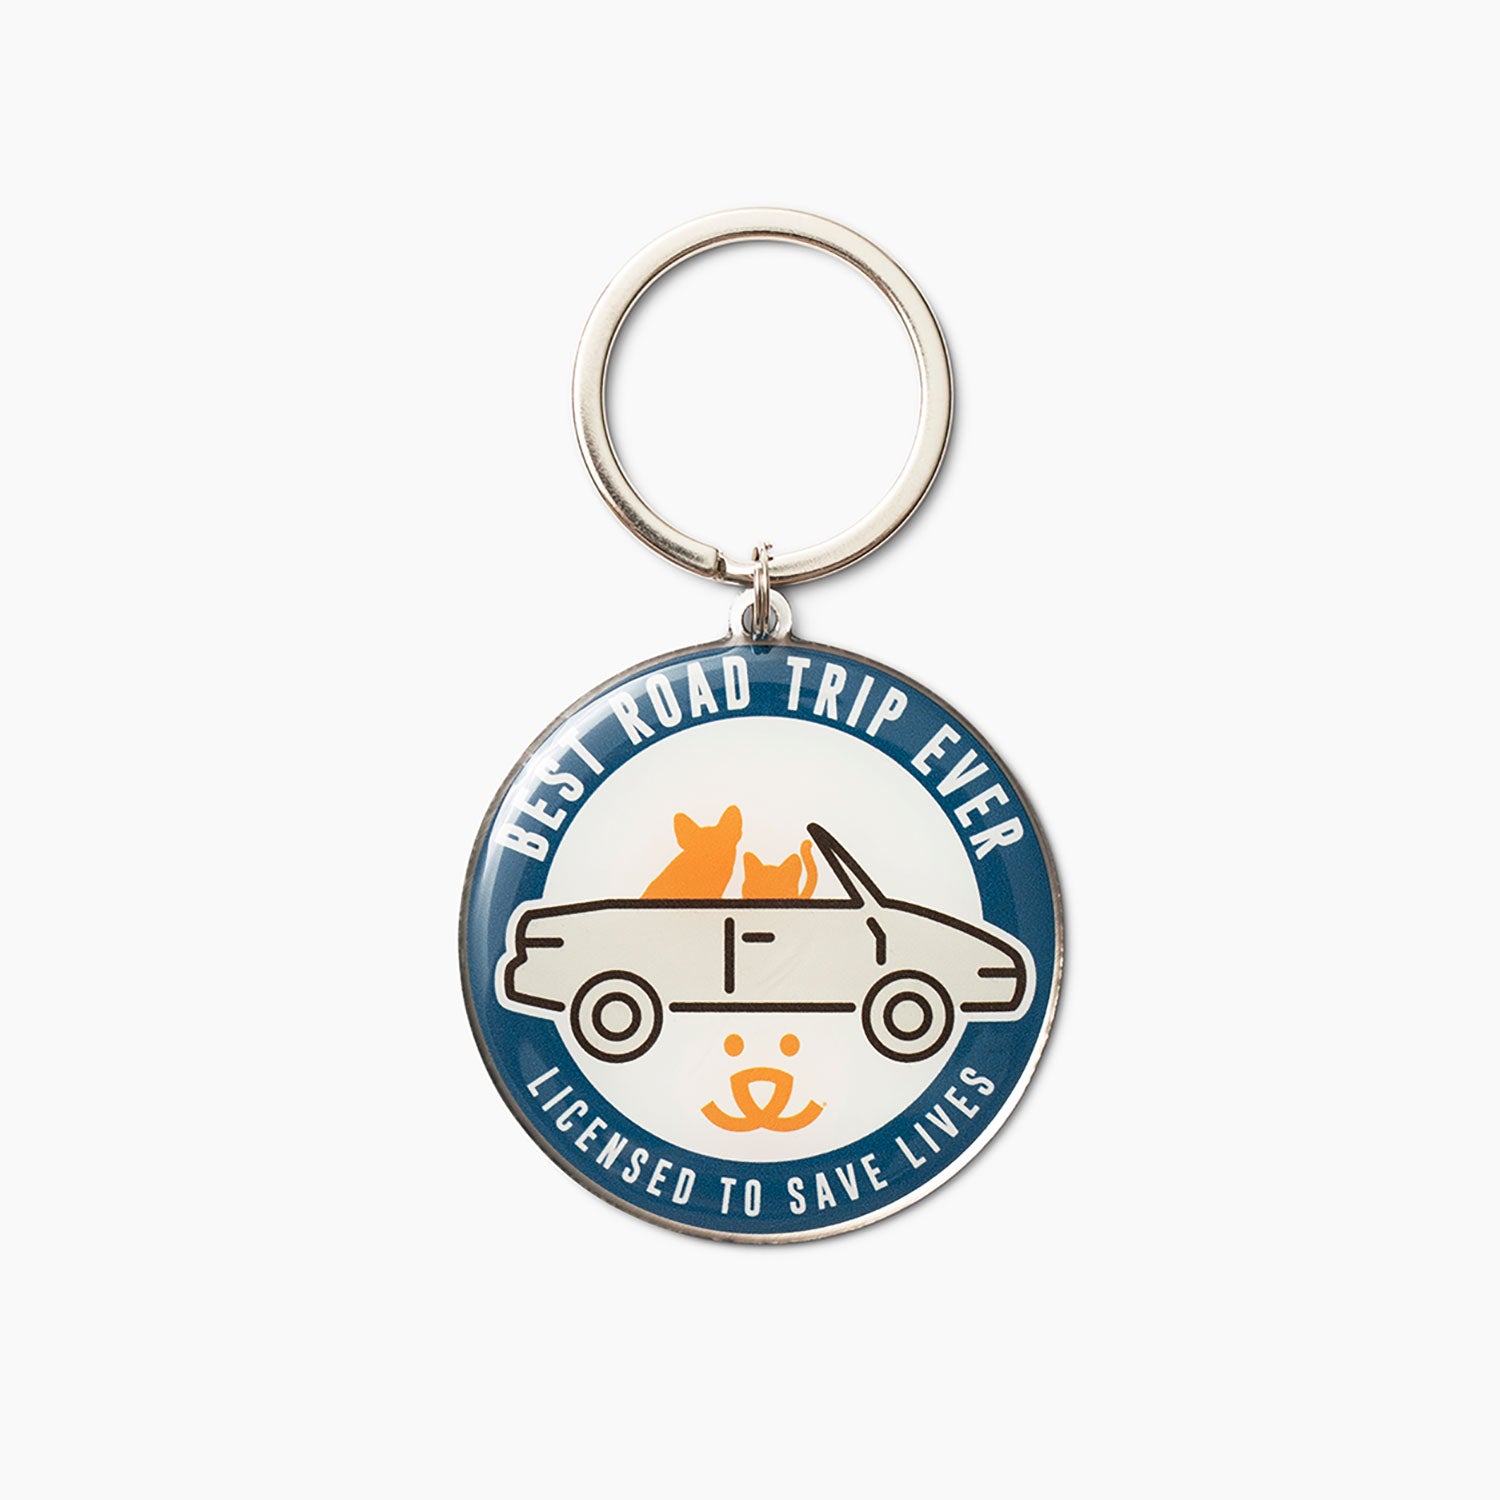 Best Road Trip Ever - Key Chain